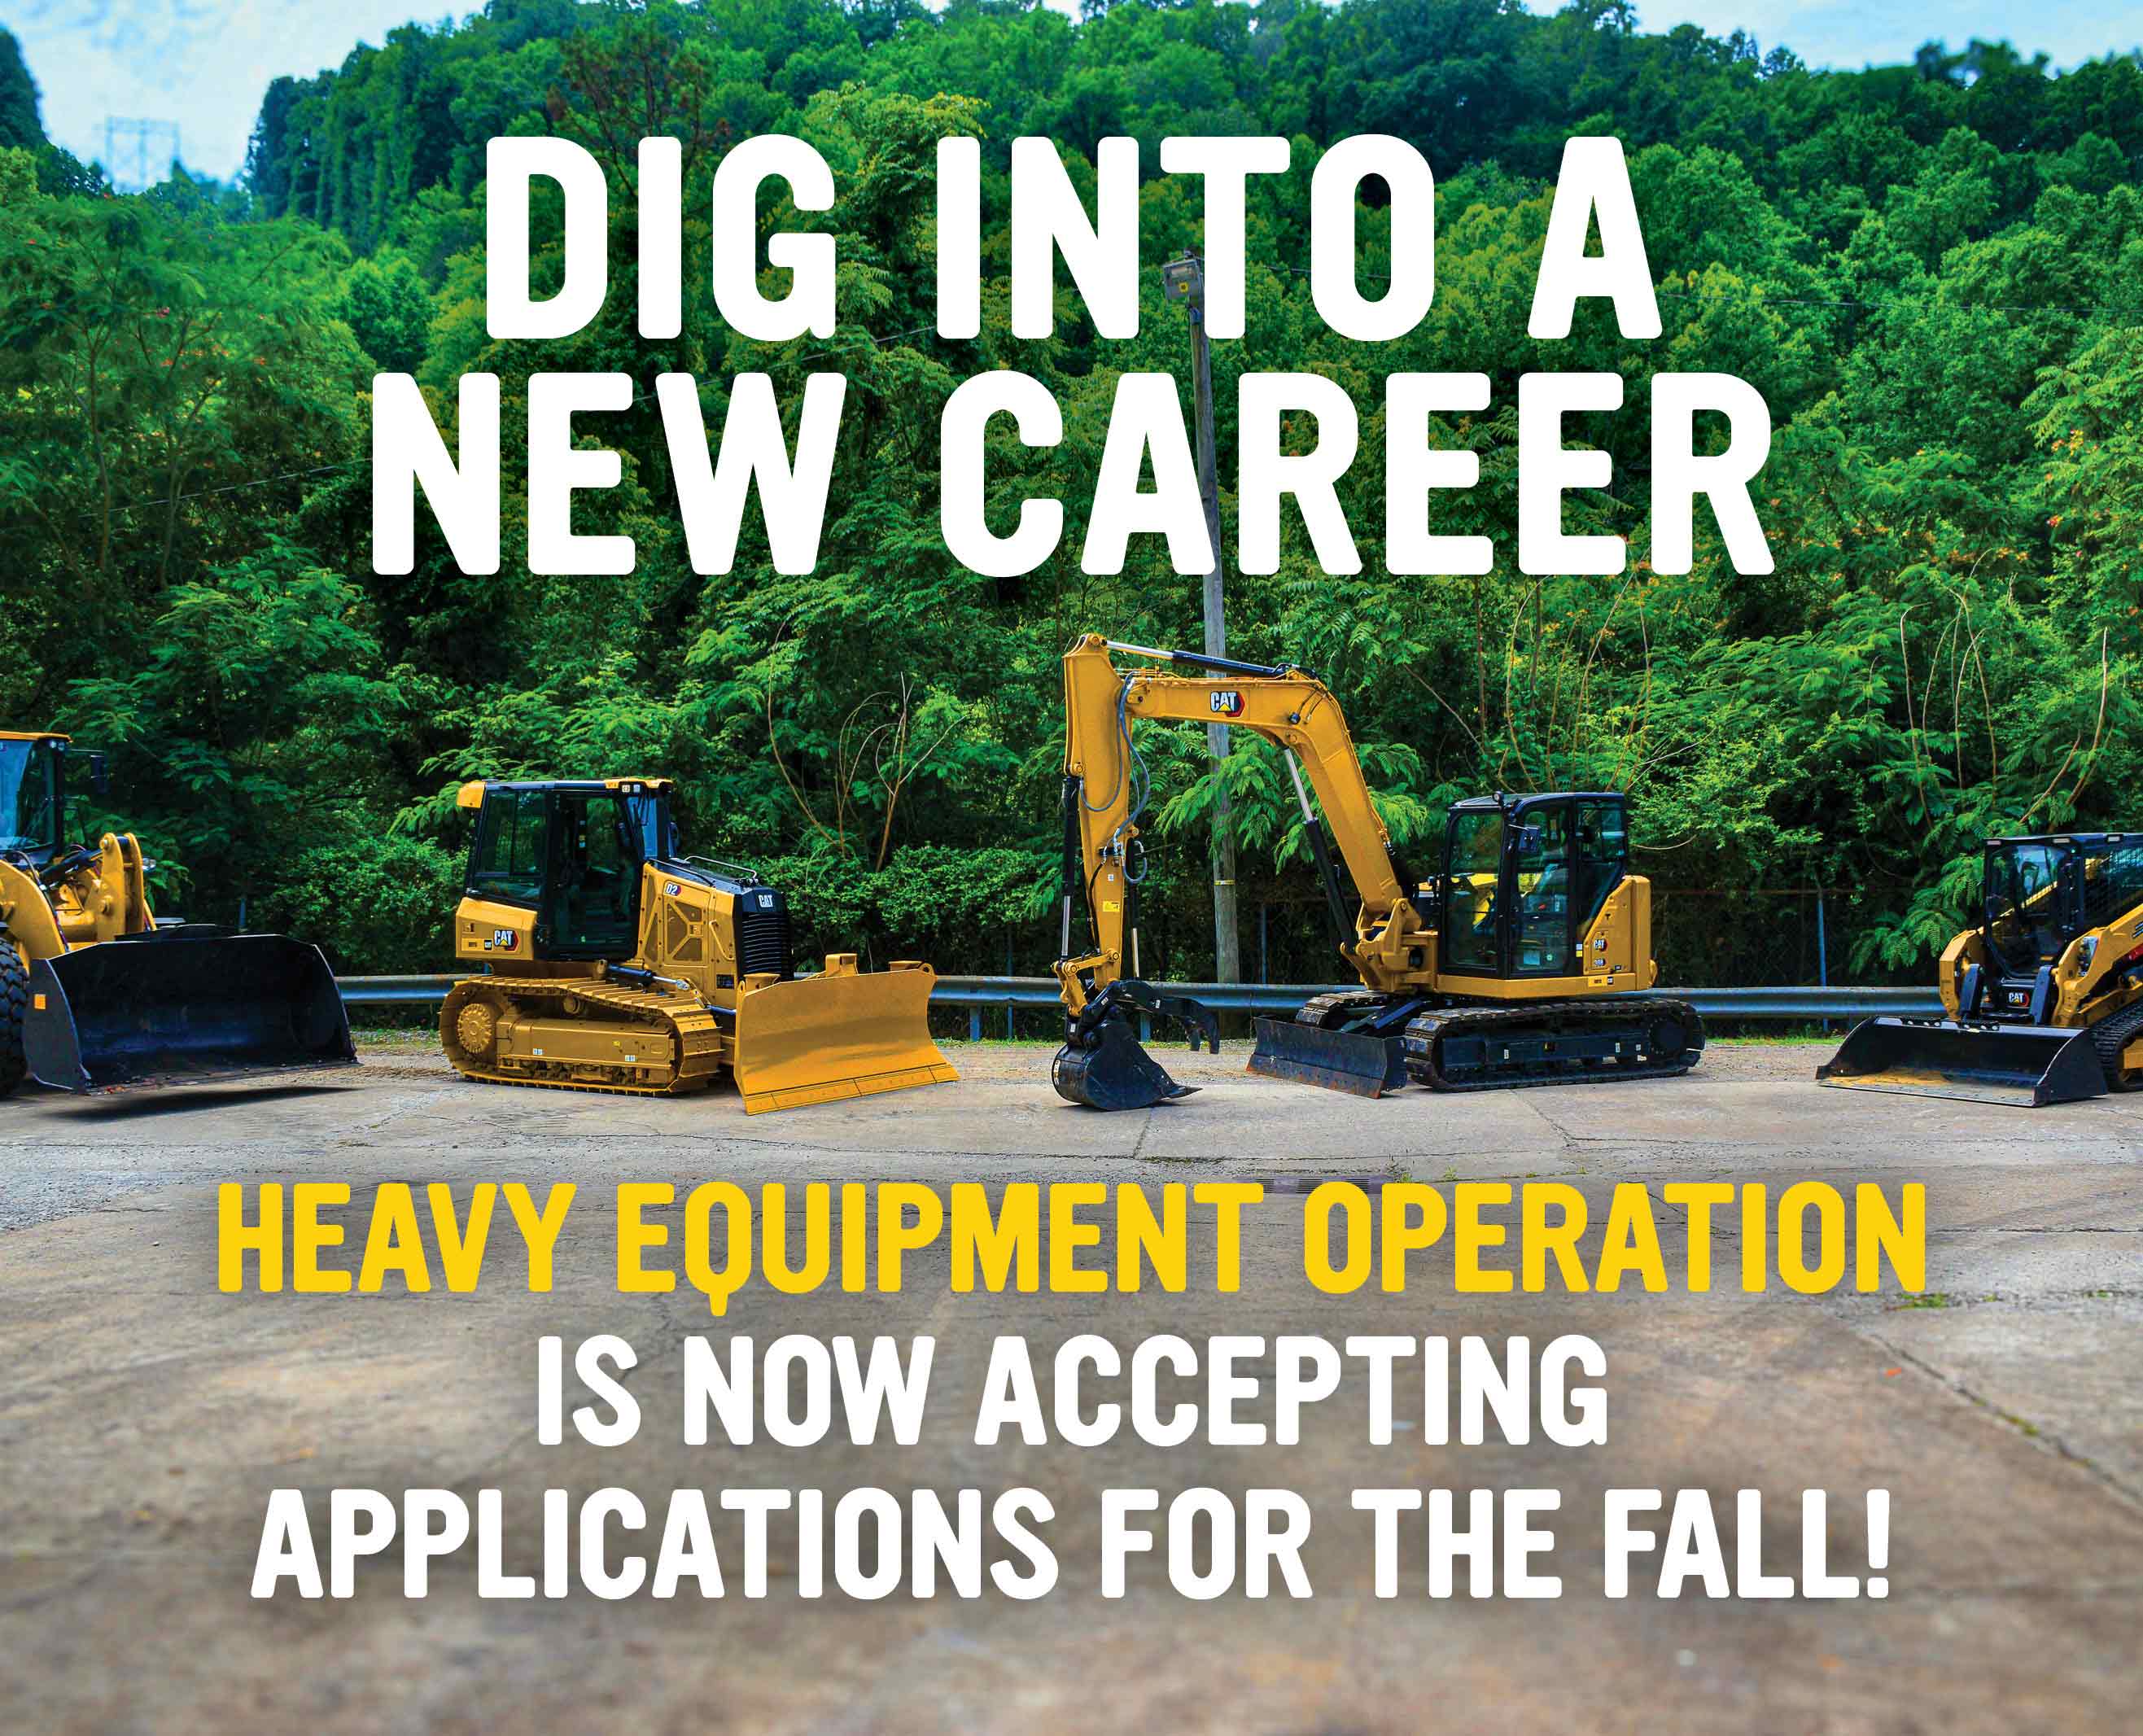 Dig into a new career with Kentucky’s most comprehensive Heavy Equipment program here at HCTC!